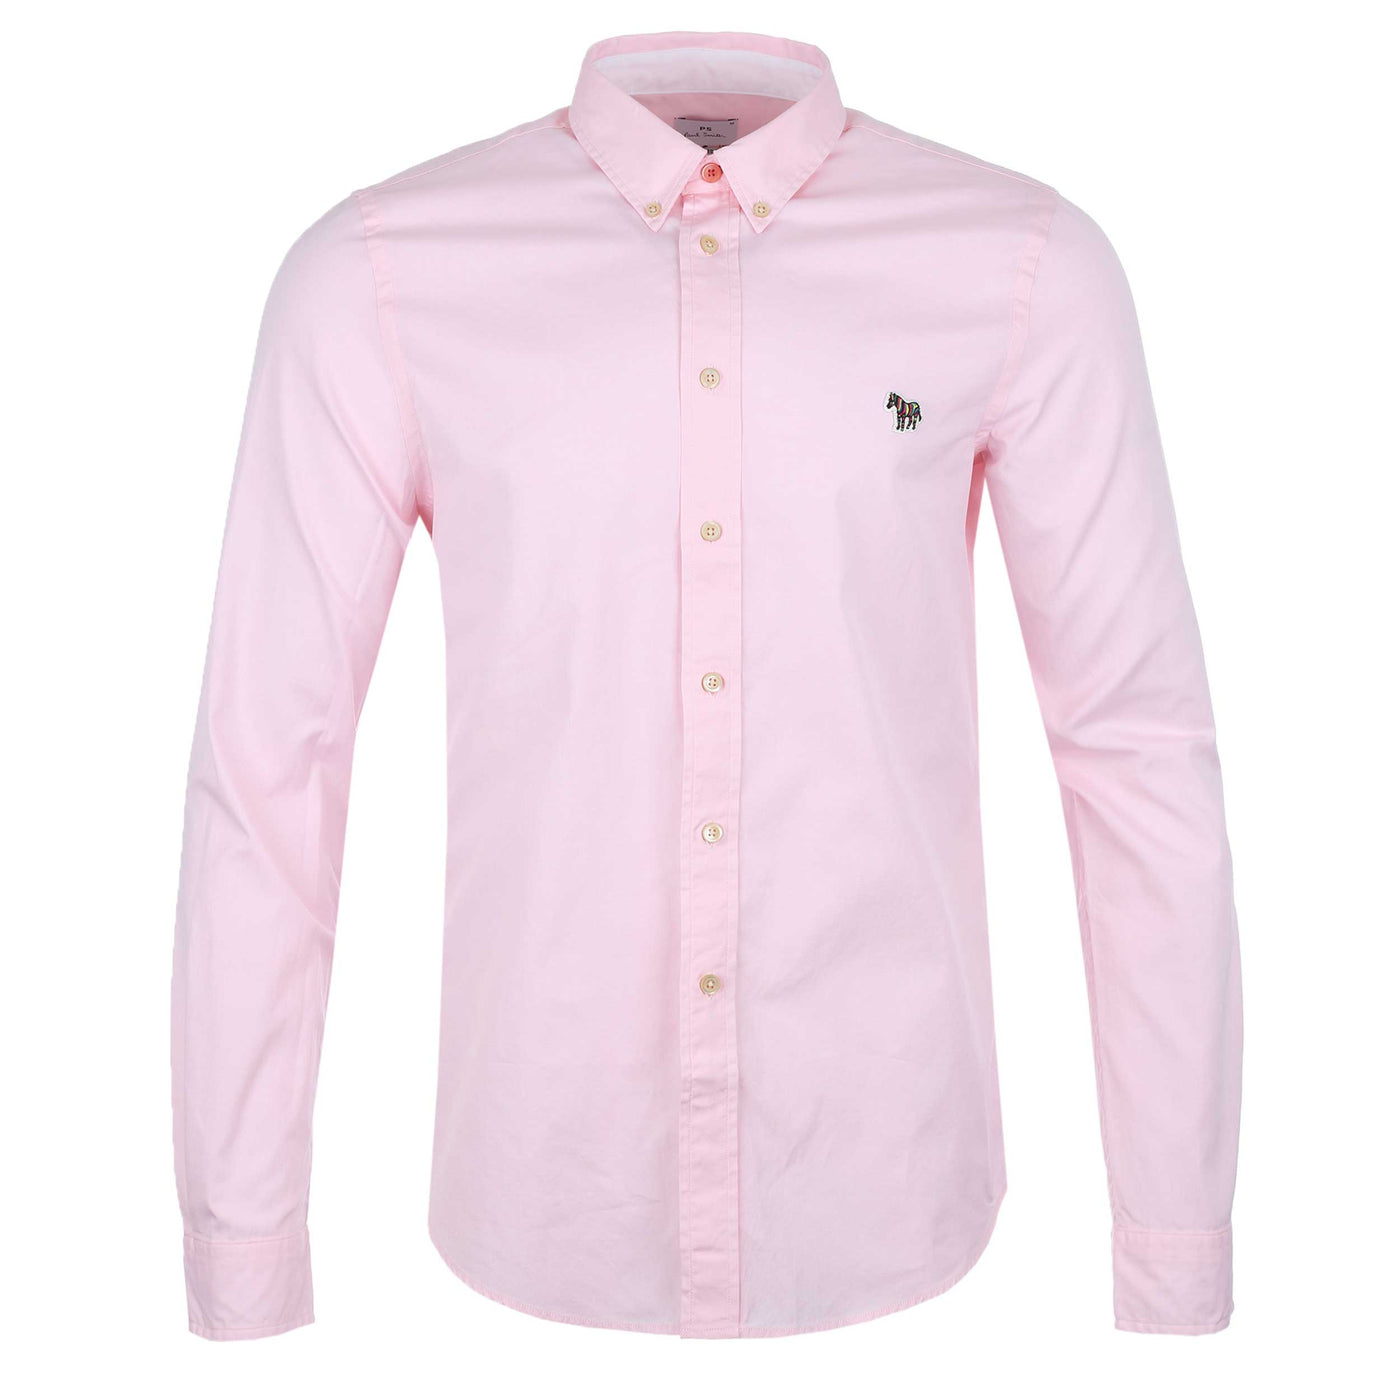 Paul Smith Zebra Badge Button Down Shirt in Pink